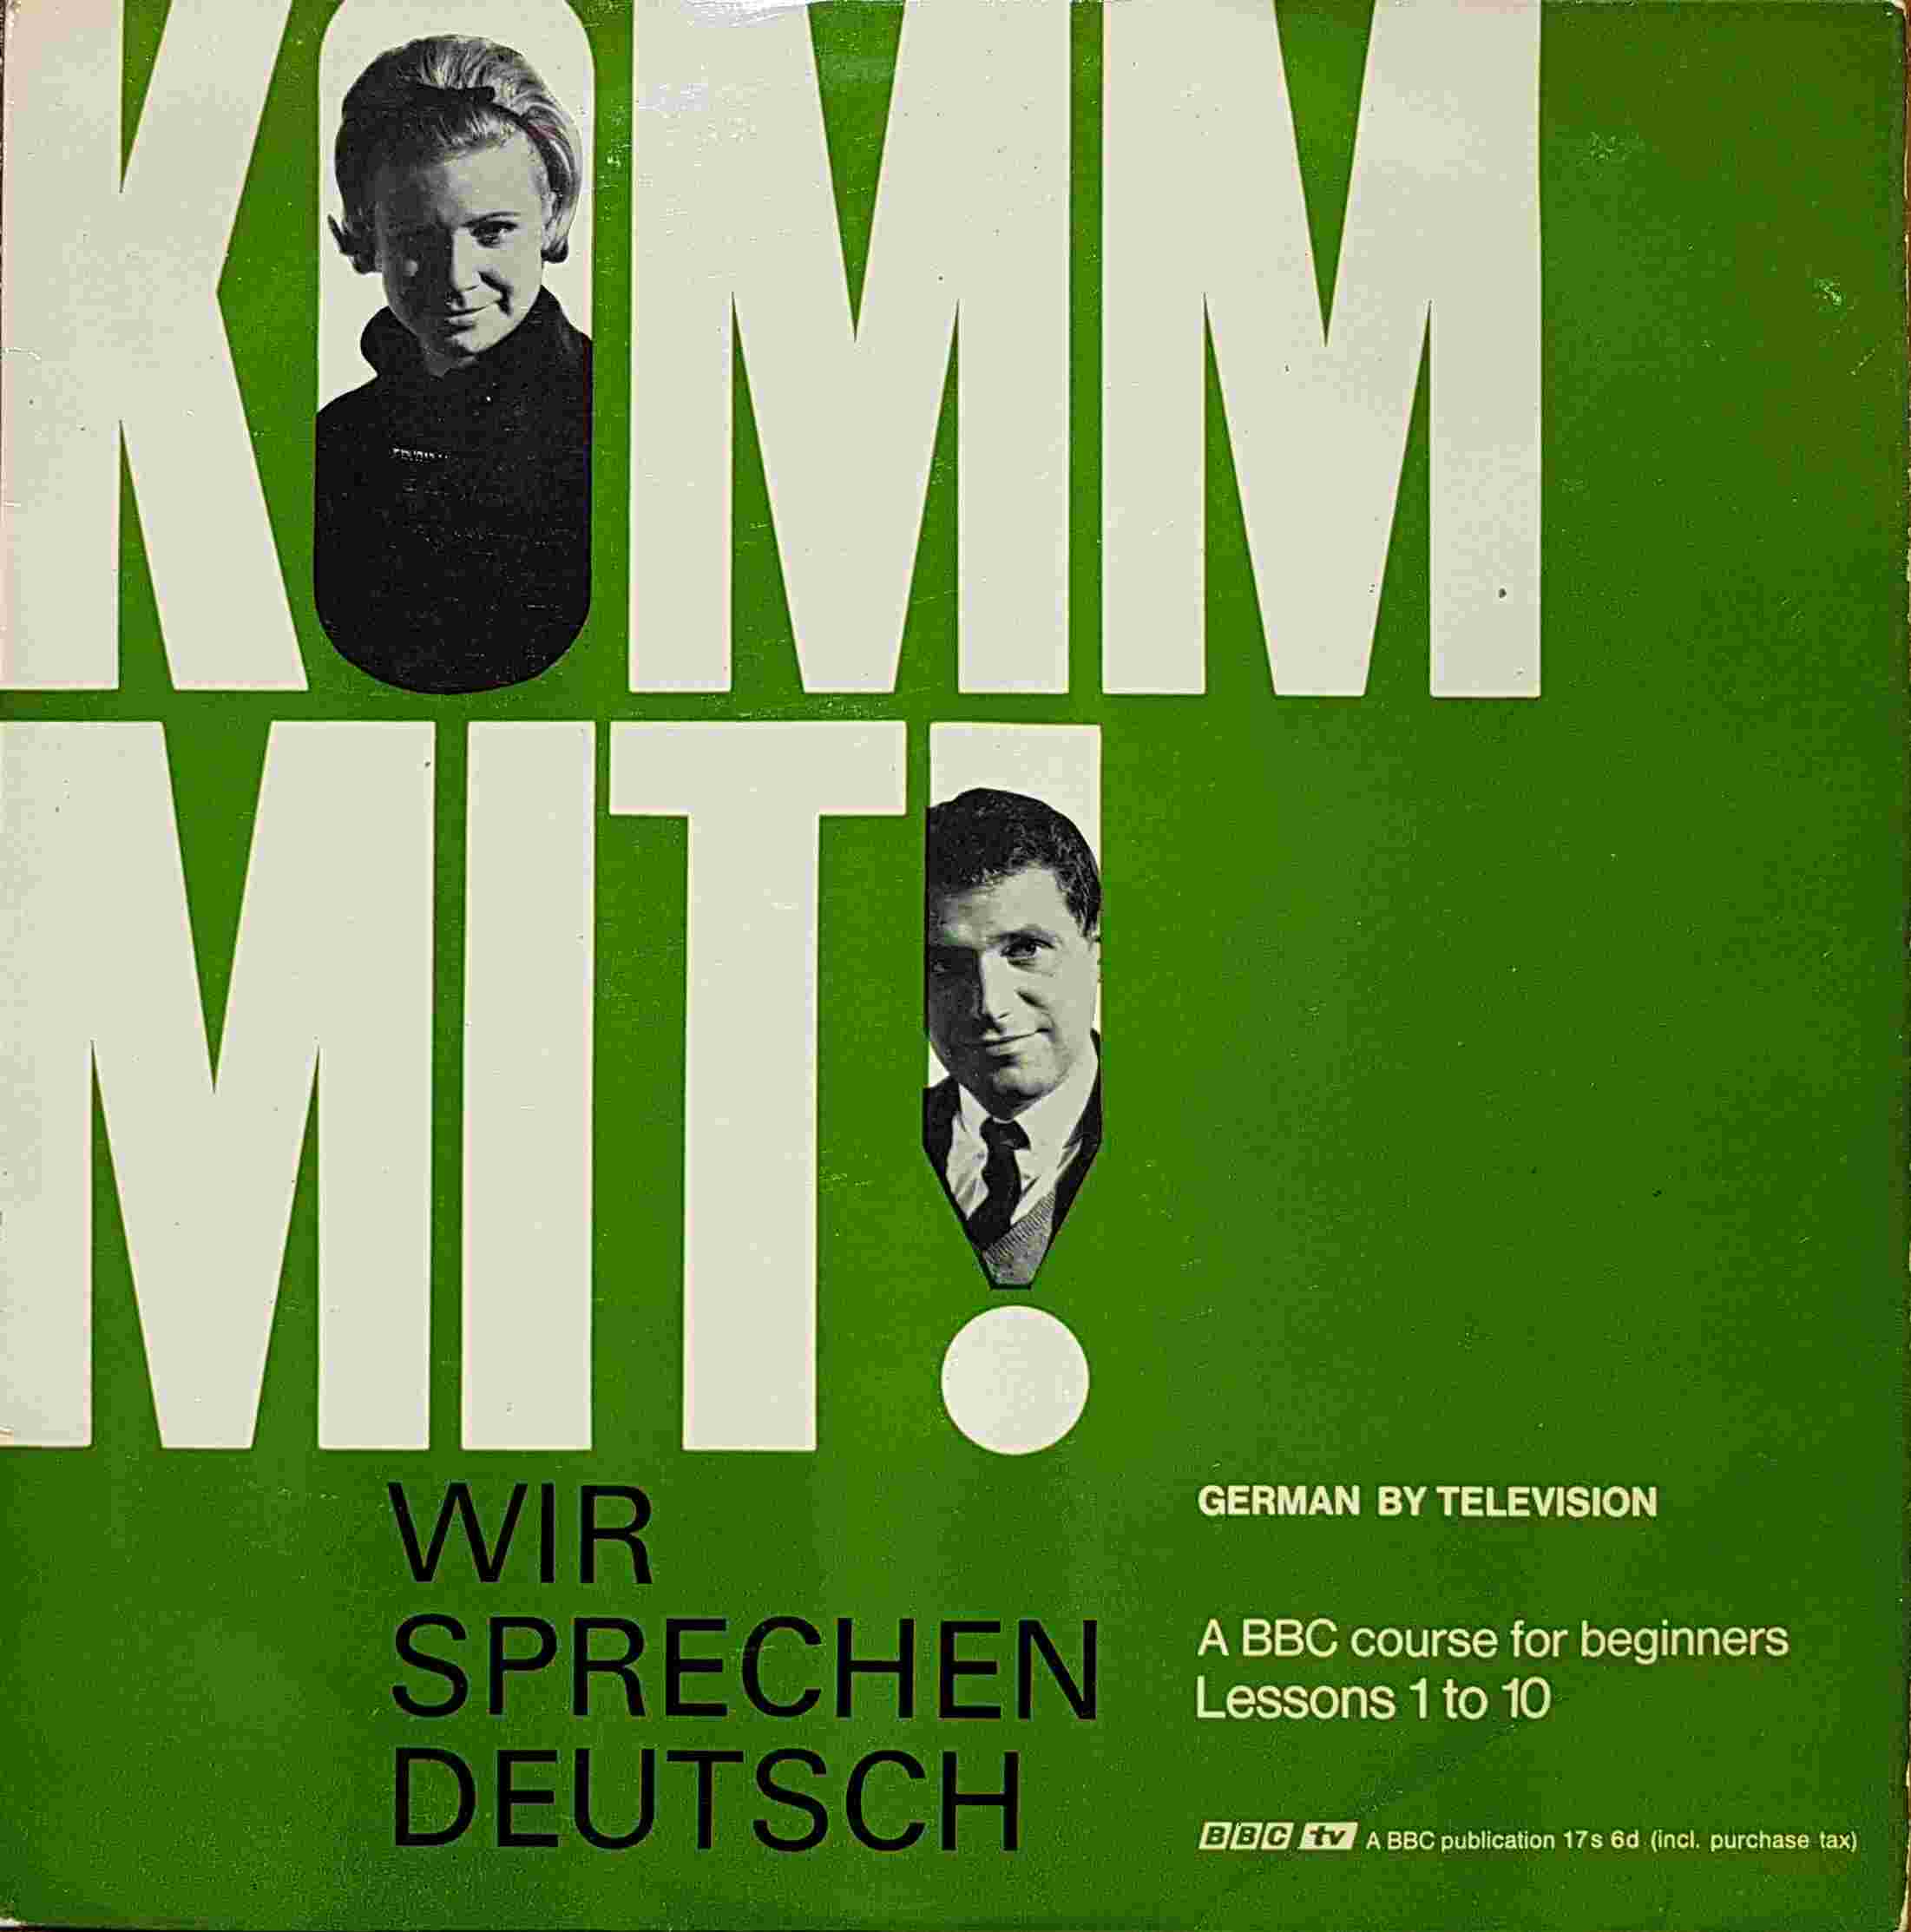 Picture of Komm mit! Wir sprechen Deutsch - A BBC course for beginners lessons 1 - 10 by artist John L. M. Trim / Frank Kuna from the BBC albums - Records and Tapes library